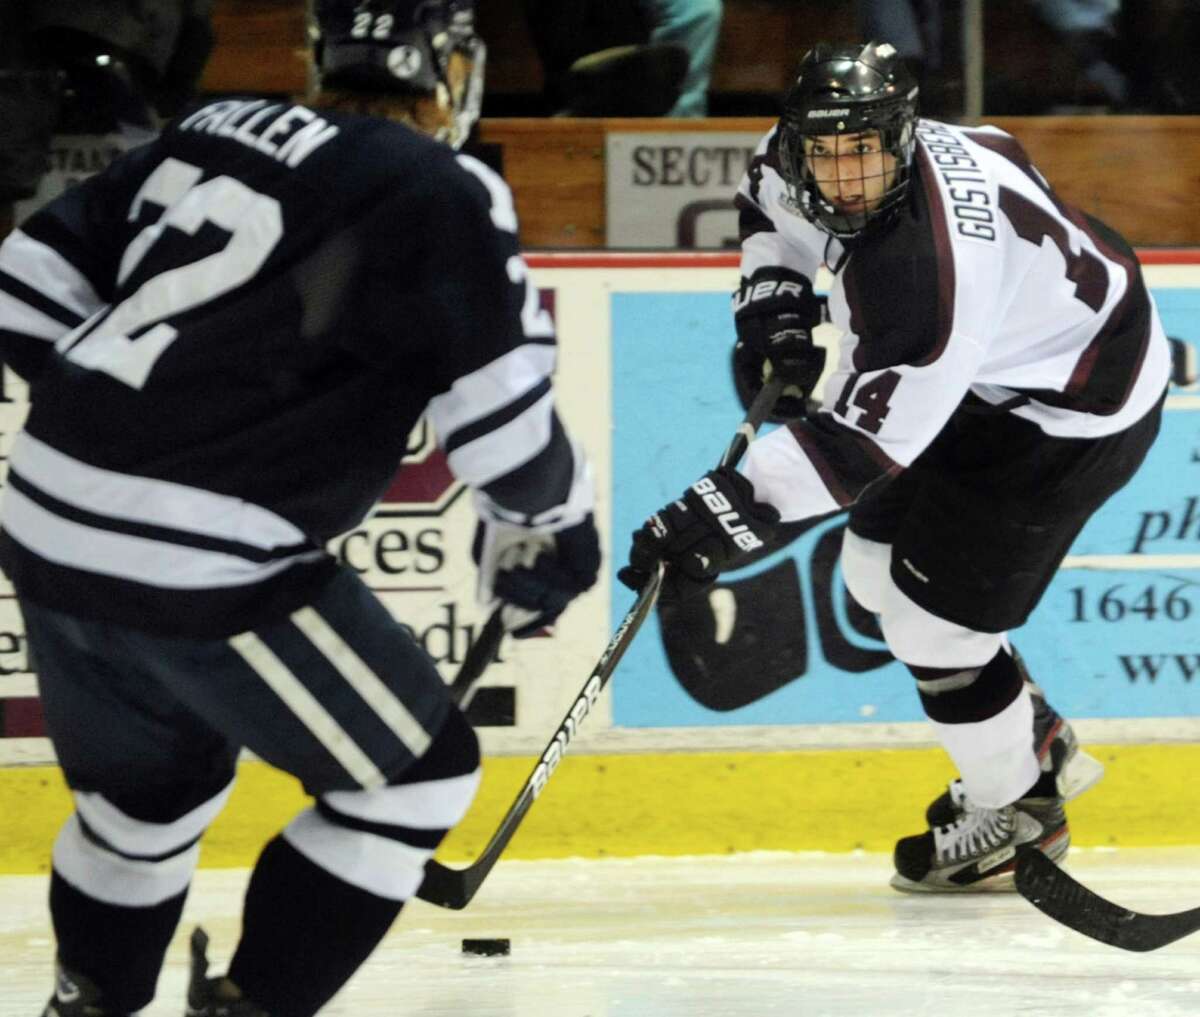 Union's Shayne Gostisbehere (14), right, works to get by Yale's Tommy Fallen (22) during their hockey game on Friday, Feb. 15, 2013, at Union College in Schenectady, N.Y. (Cindy Schultz / Times Union)